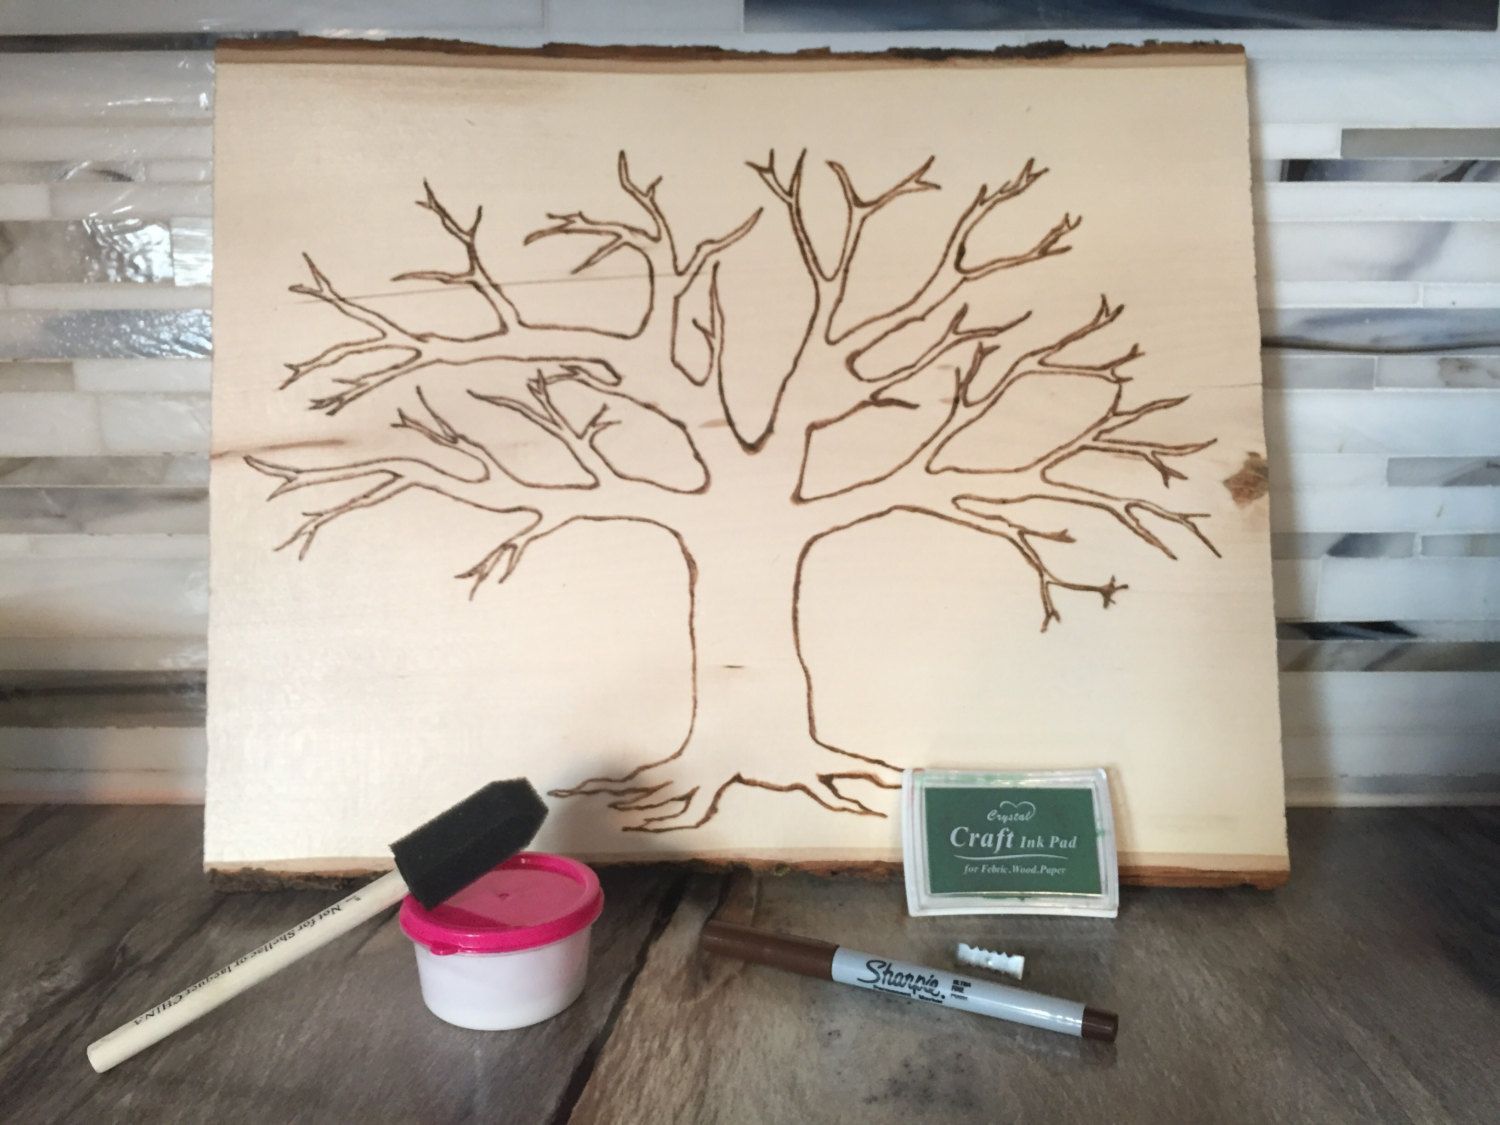 12 Family Tree Ideas You Can DIY - How to Make a Family Tree